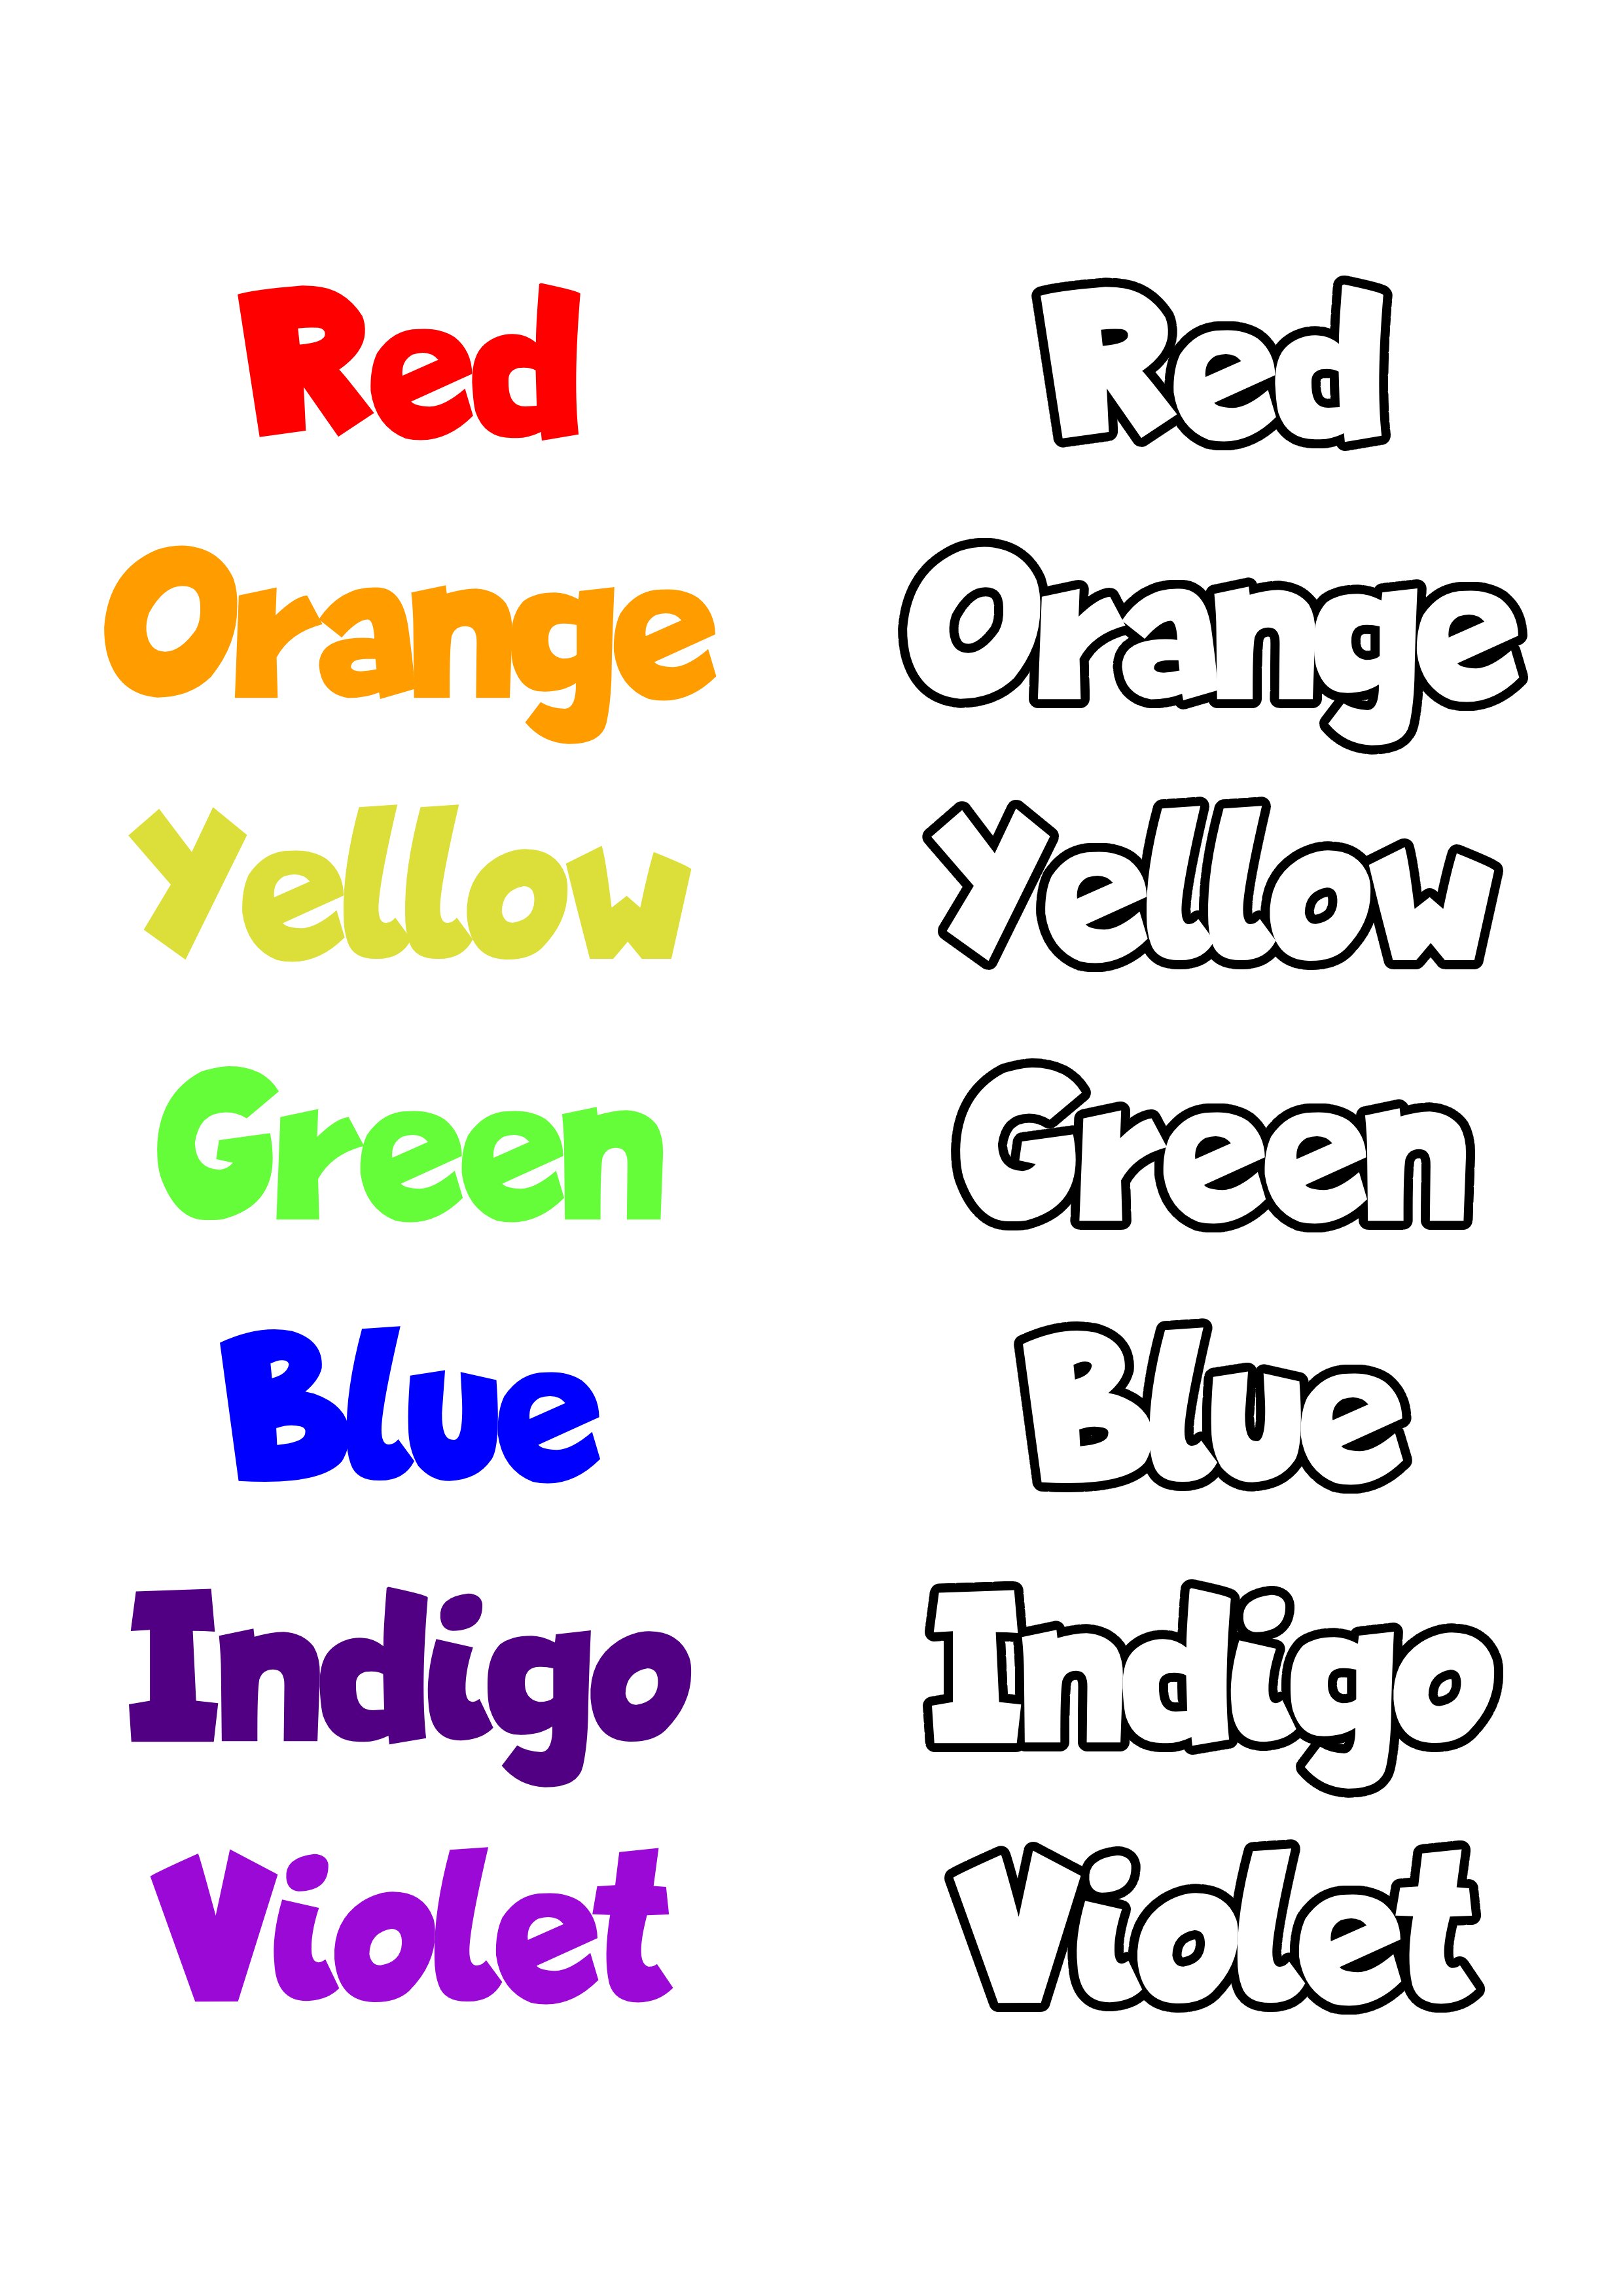 Learn Basic Colors for Kids, rainbow colors